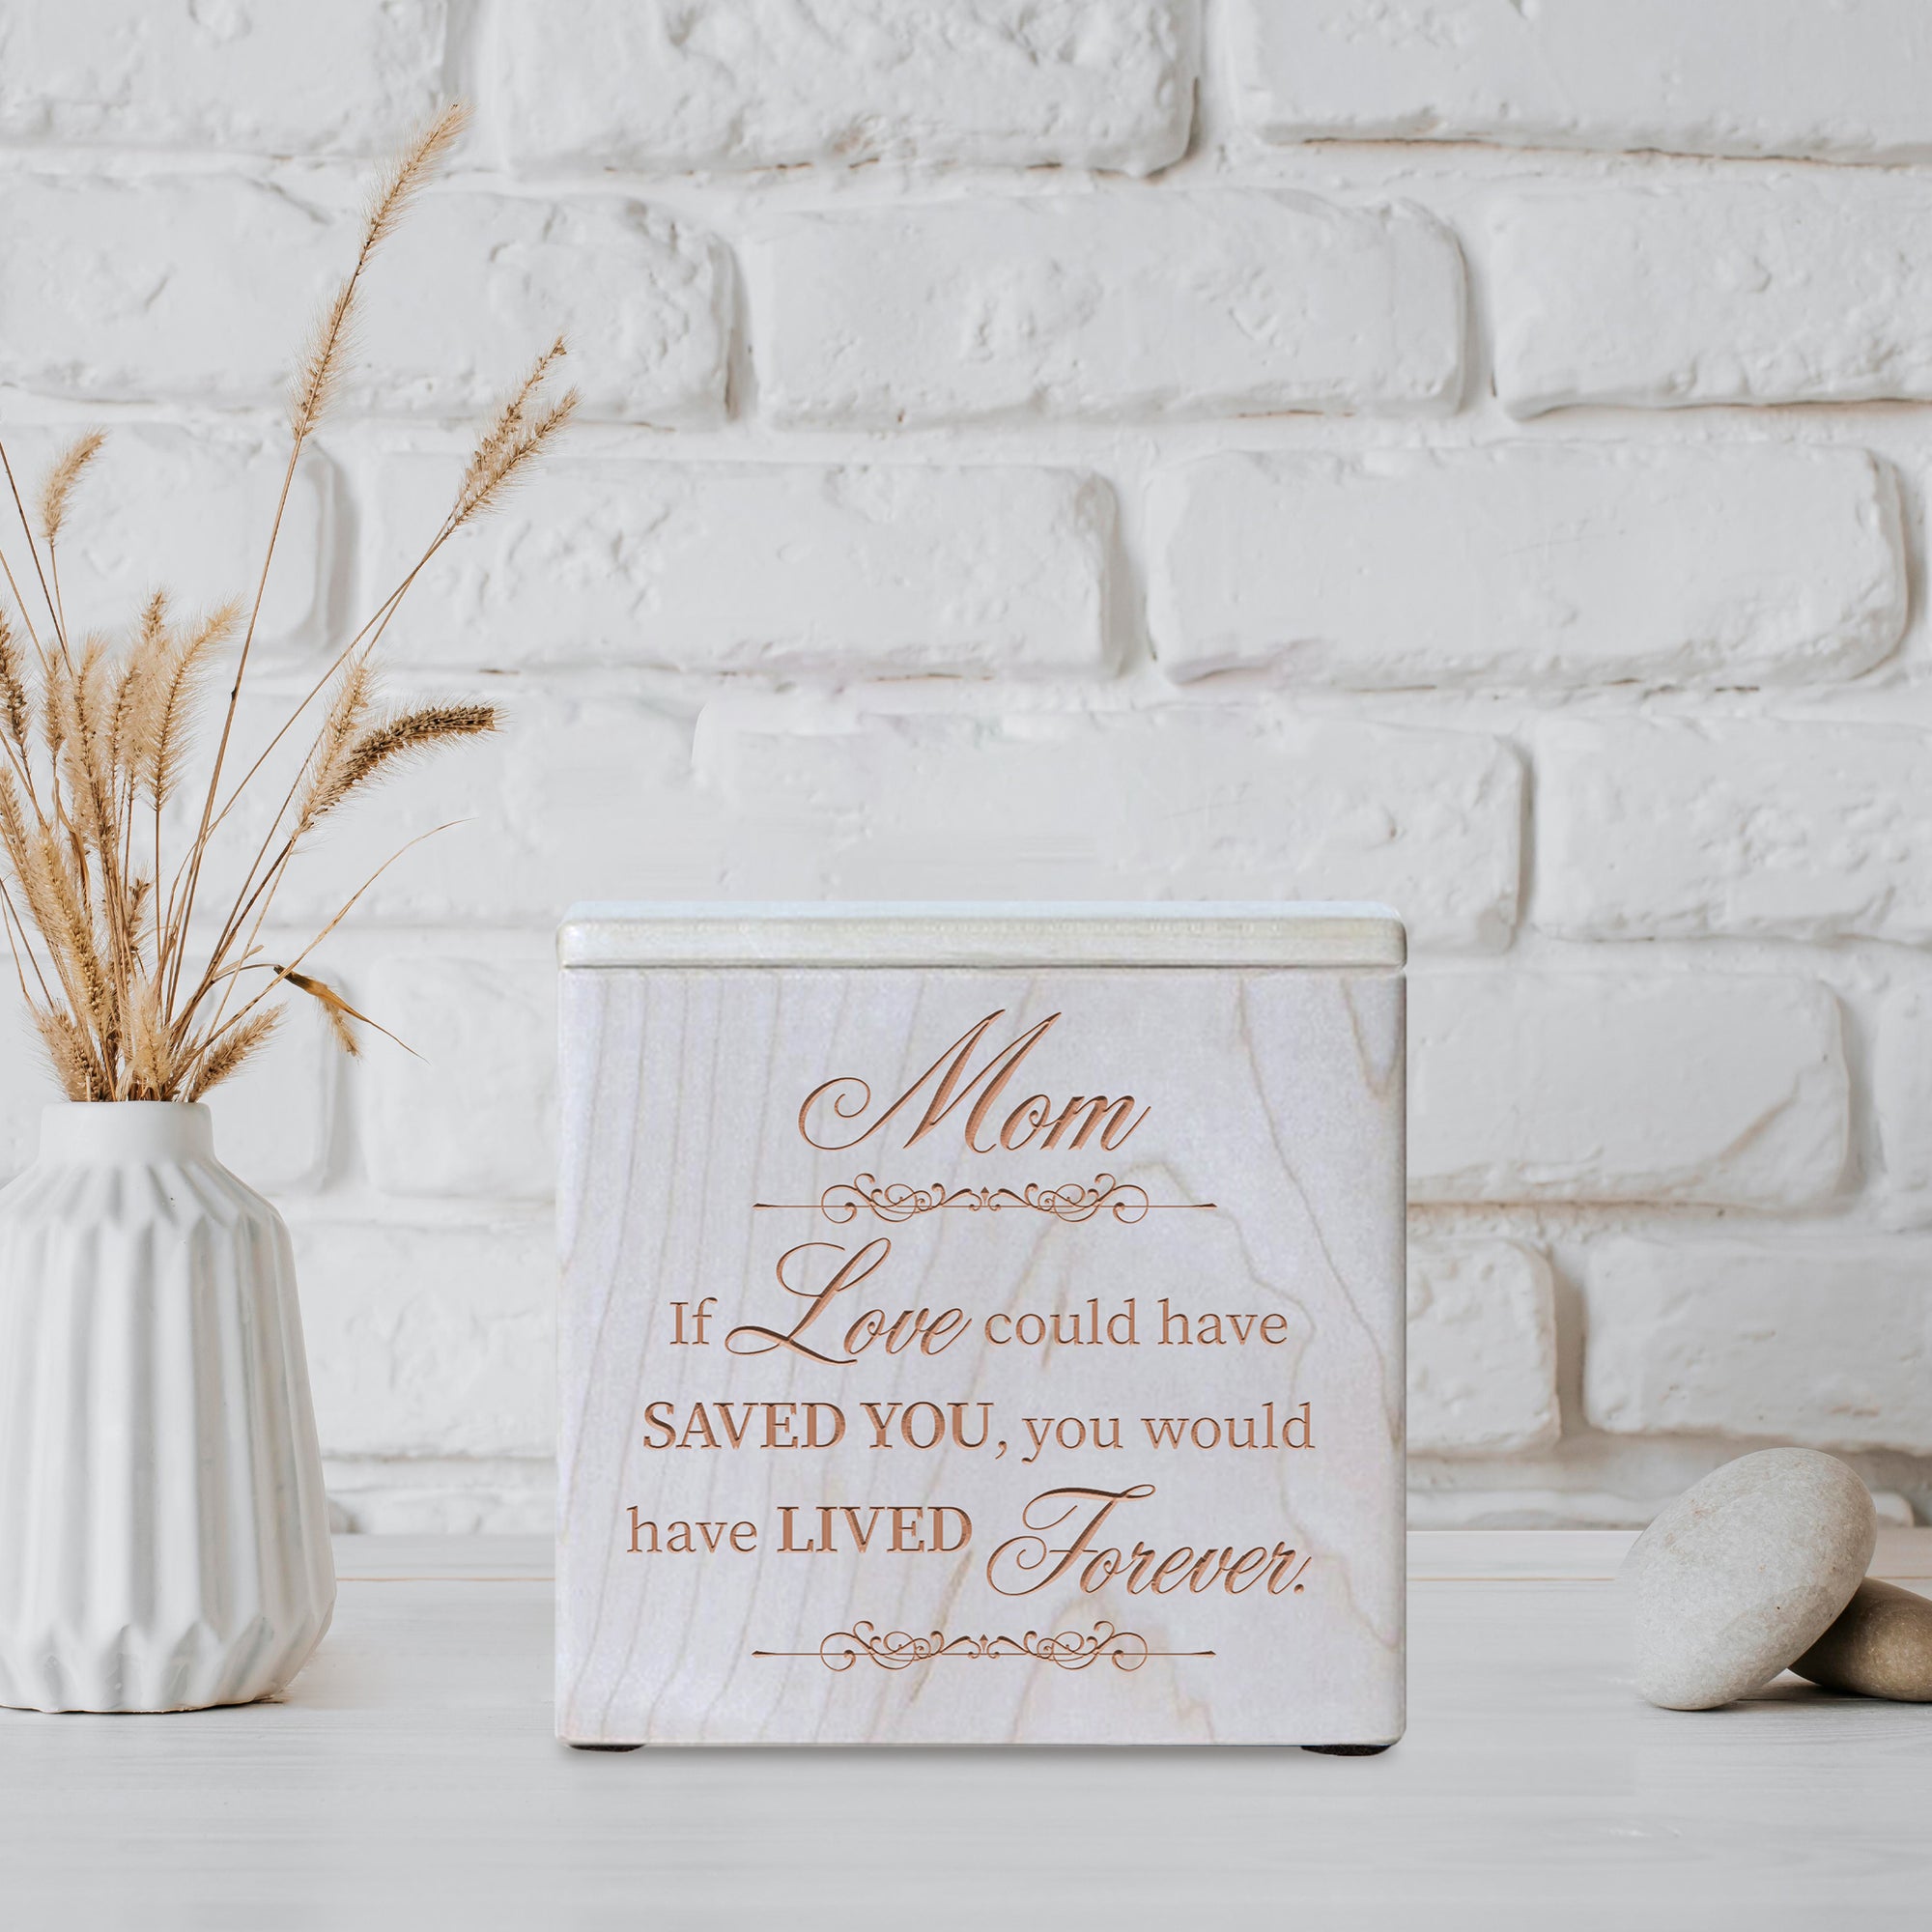 Wooden Memorial Cremation Urn Keepsake Box for Human or Pet Ashes - If Love Could, Mom